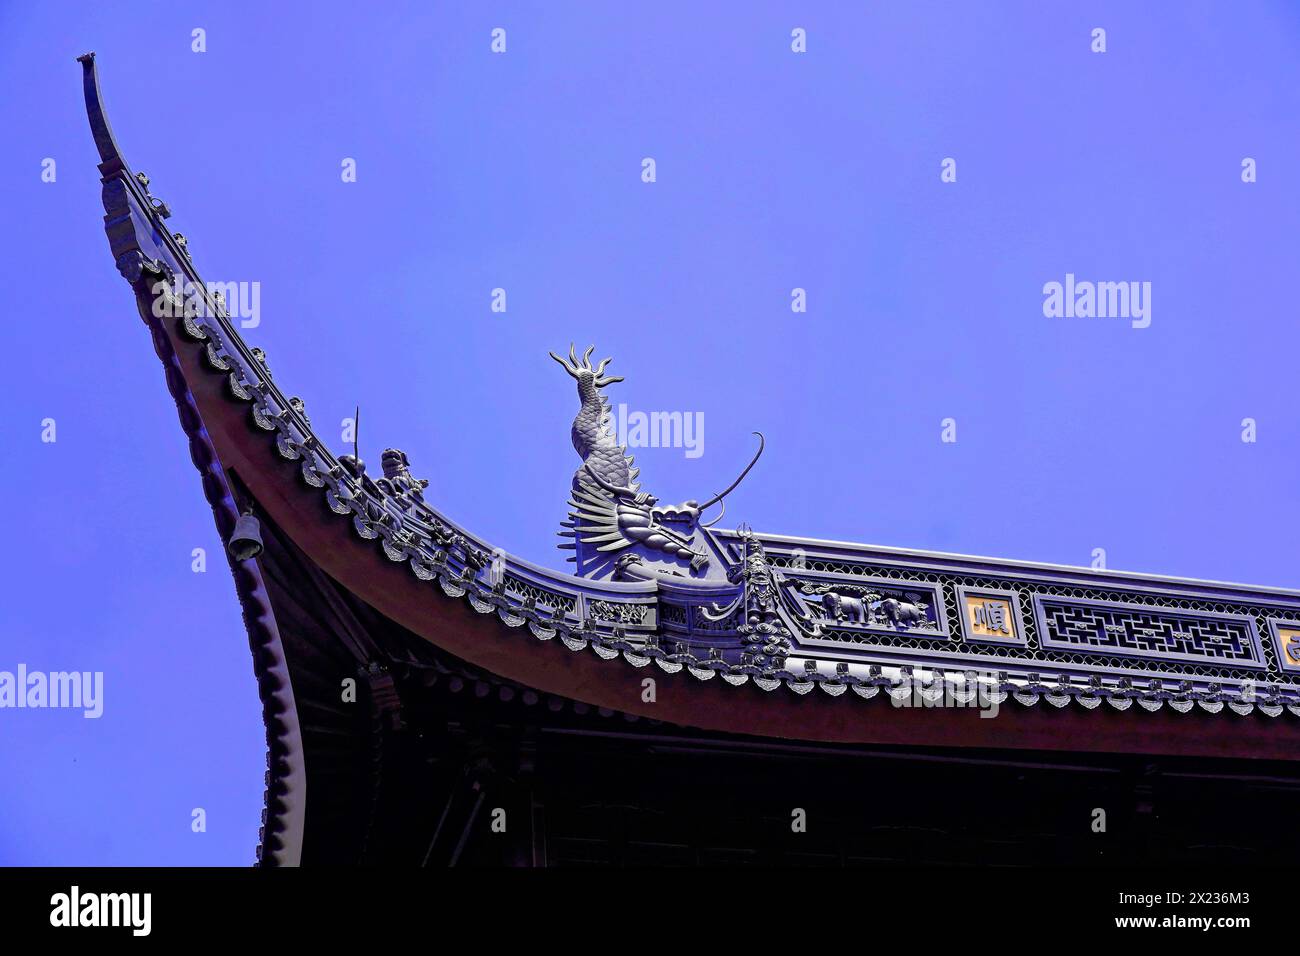 Jade Buddha Temple, Shanghai, detailed view of a temple roof with a dragon sculpture against a blue sky, Shanghai, China Stock Photo